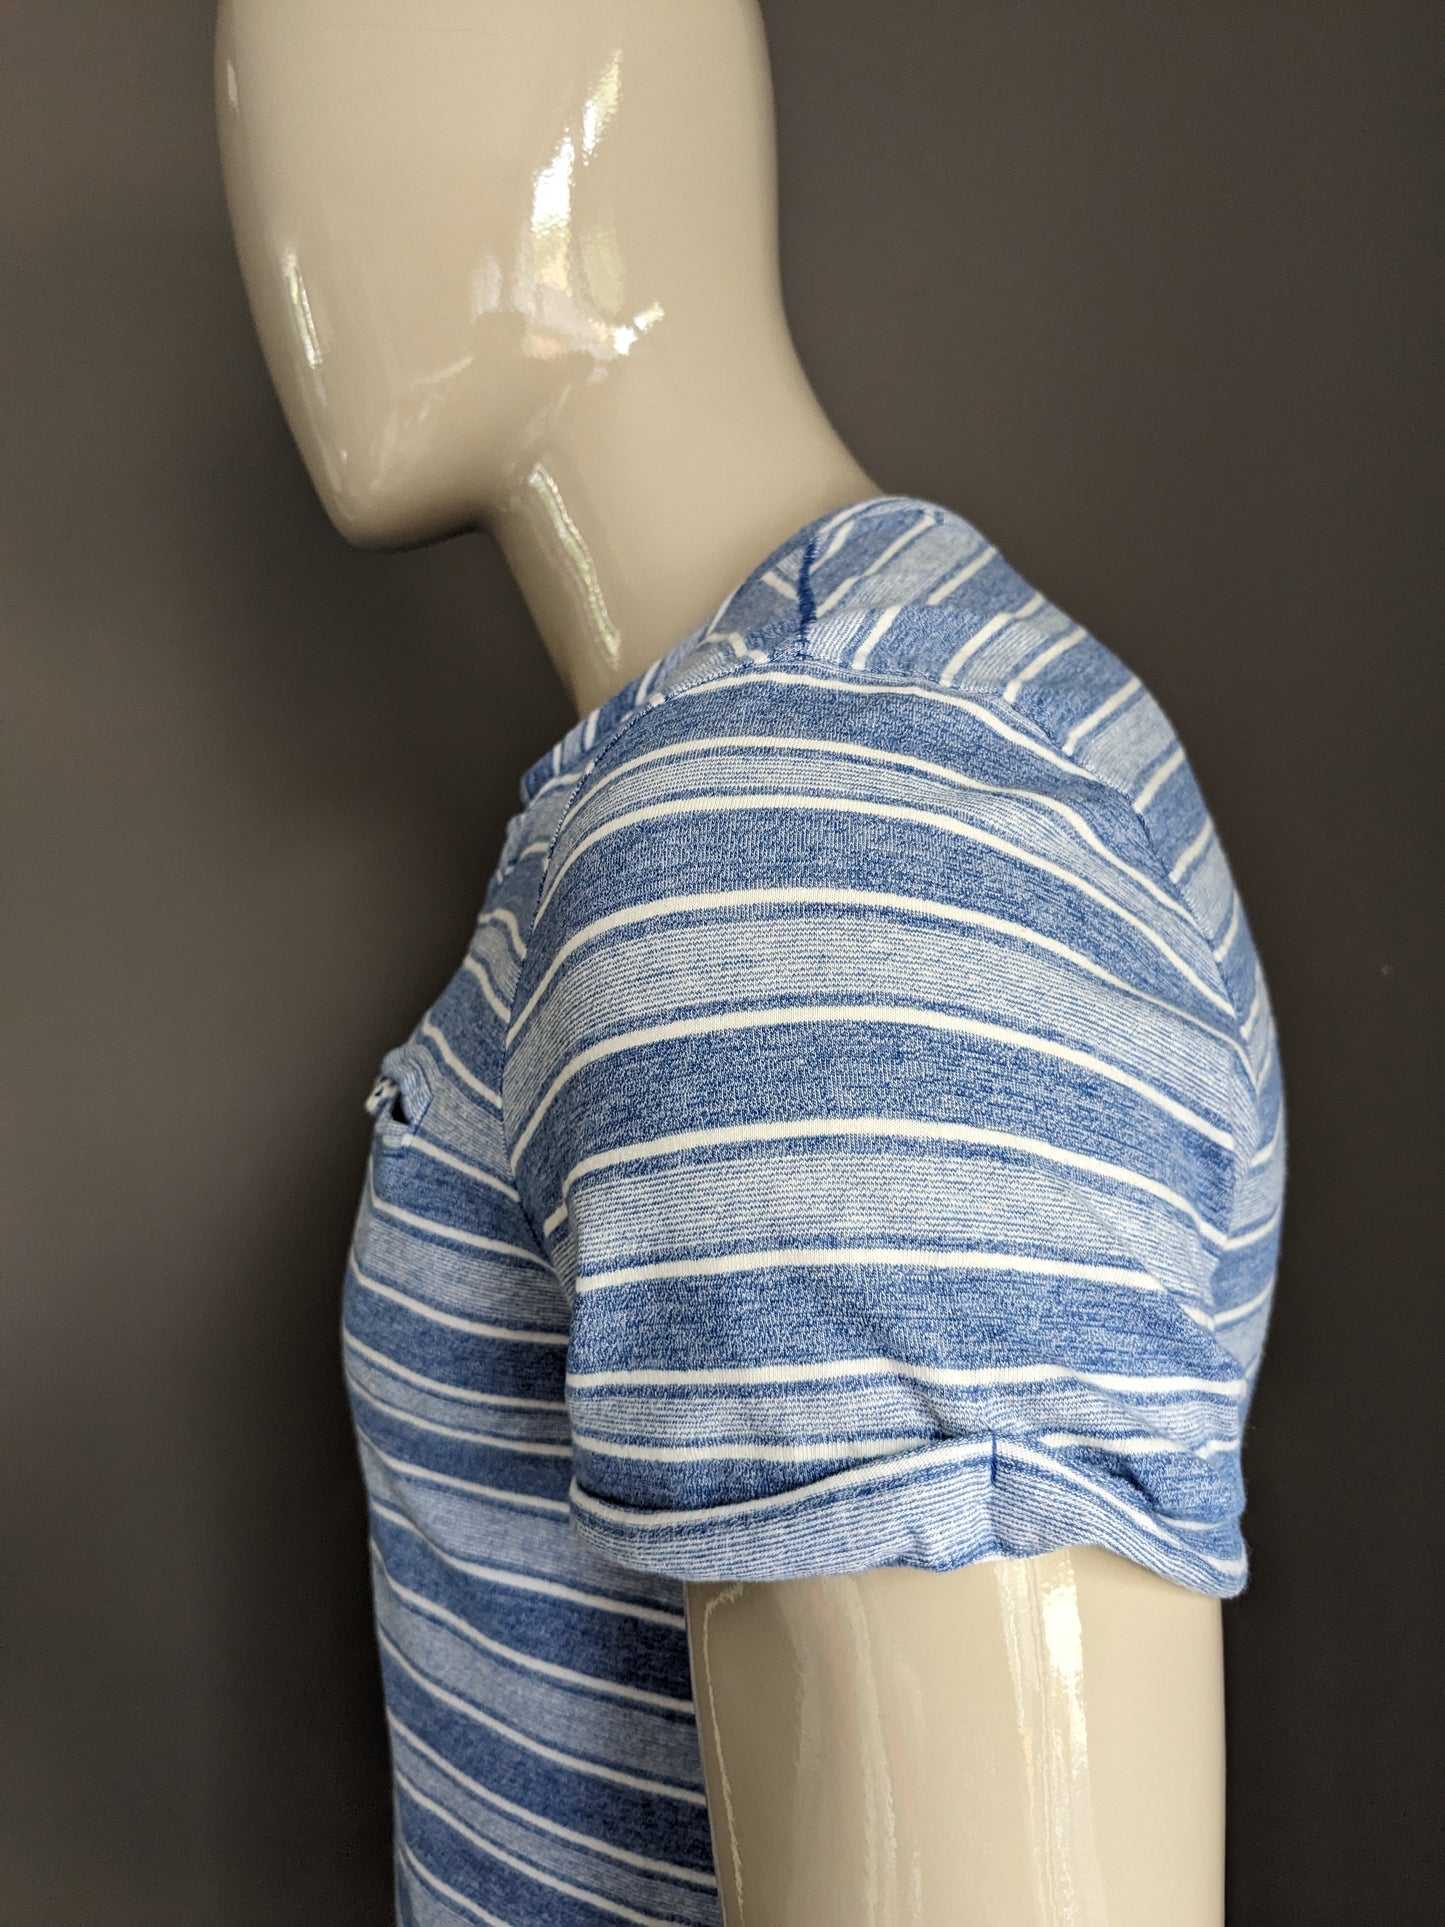 Refill shirt with V-neck and buttons. Blue white striped. Size M.